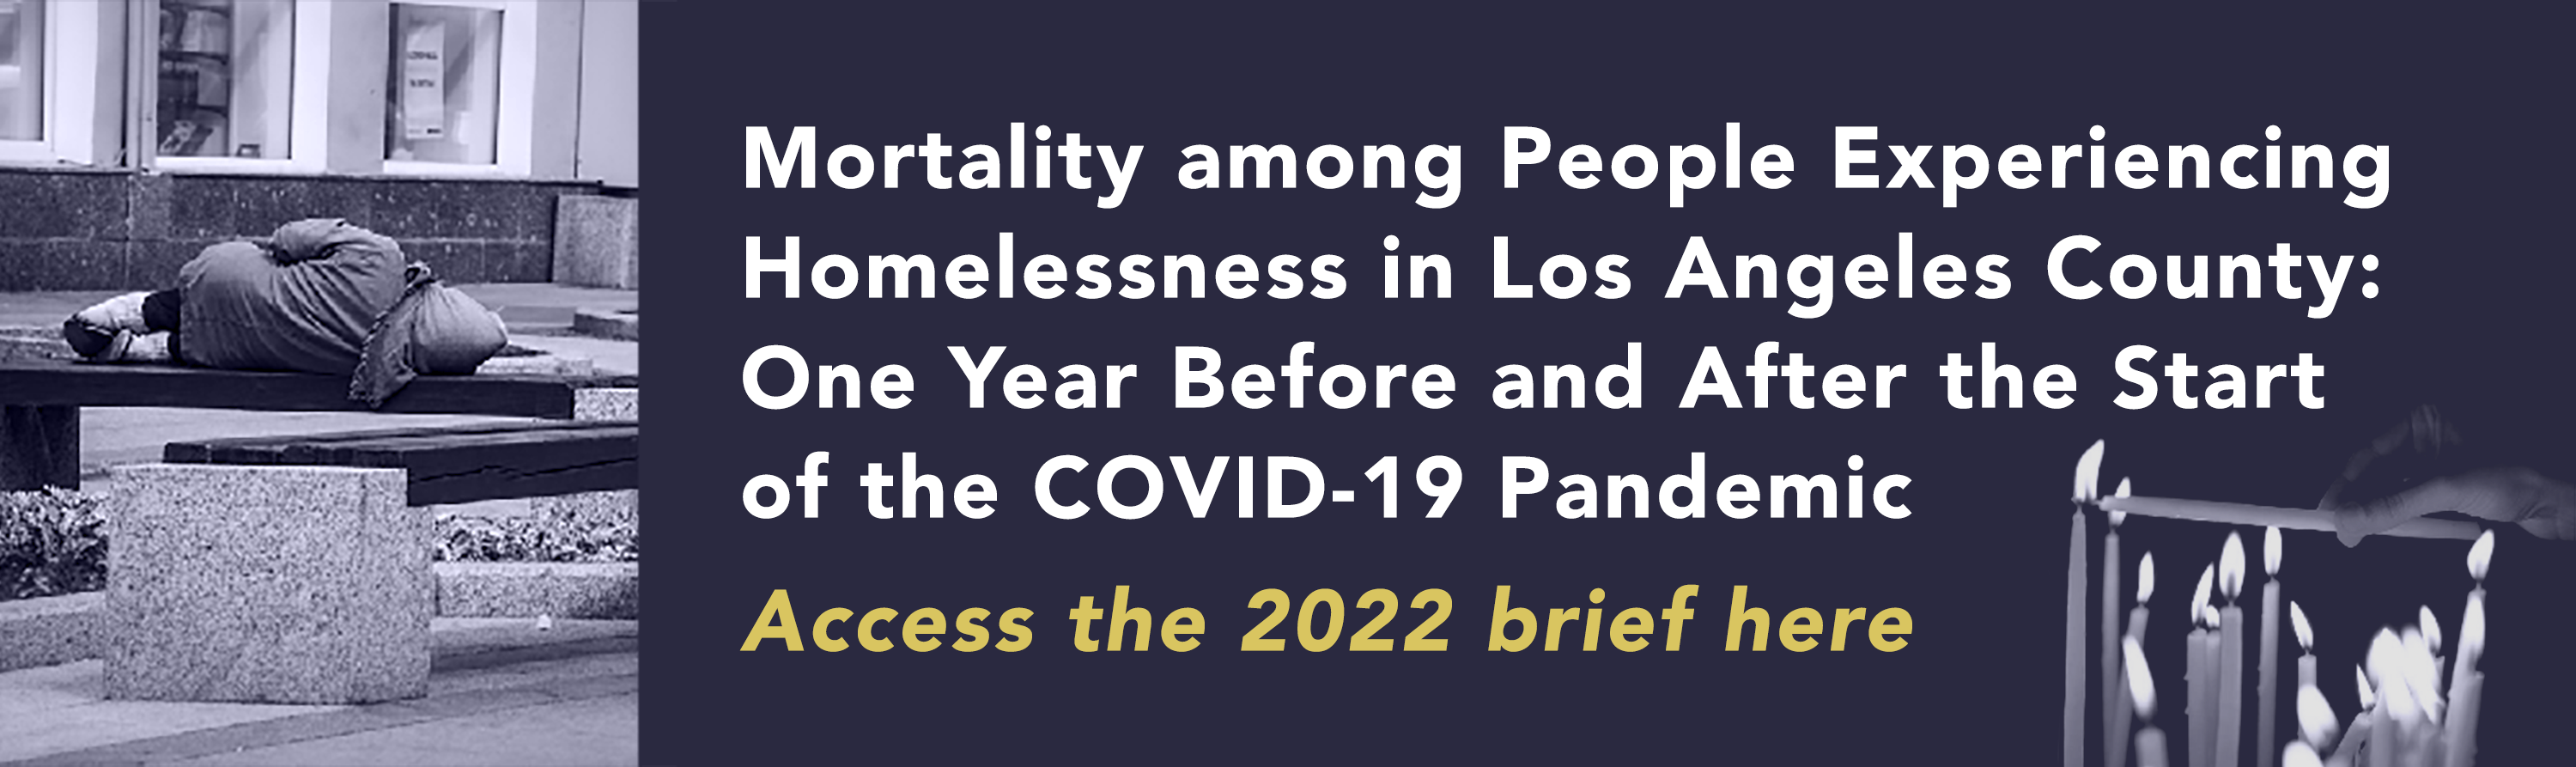 Issue brief on homeless mortality in 2022